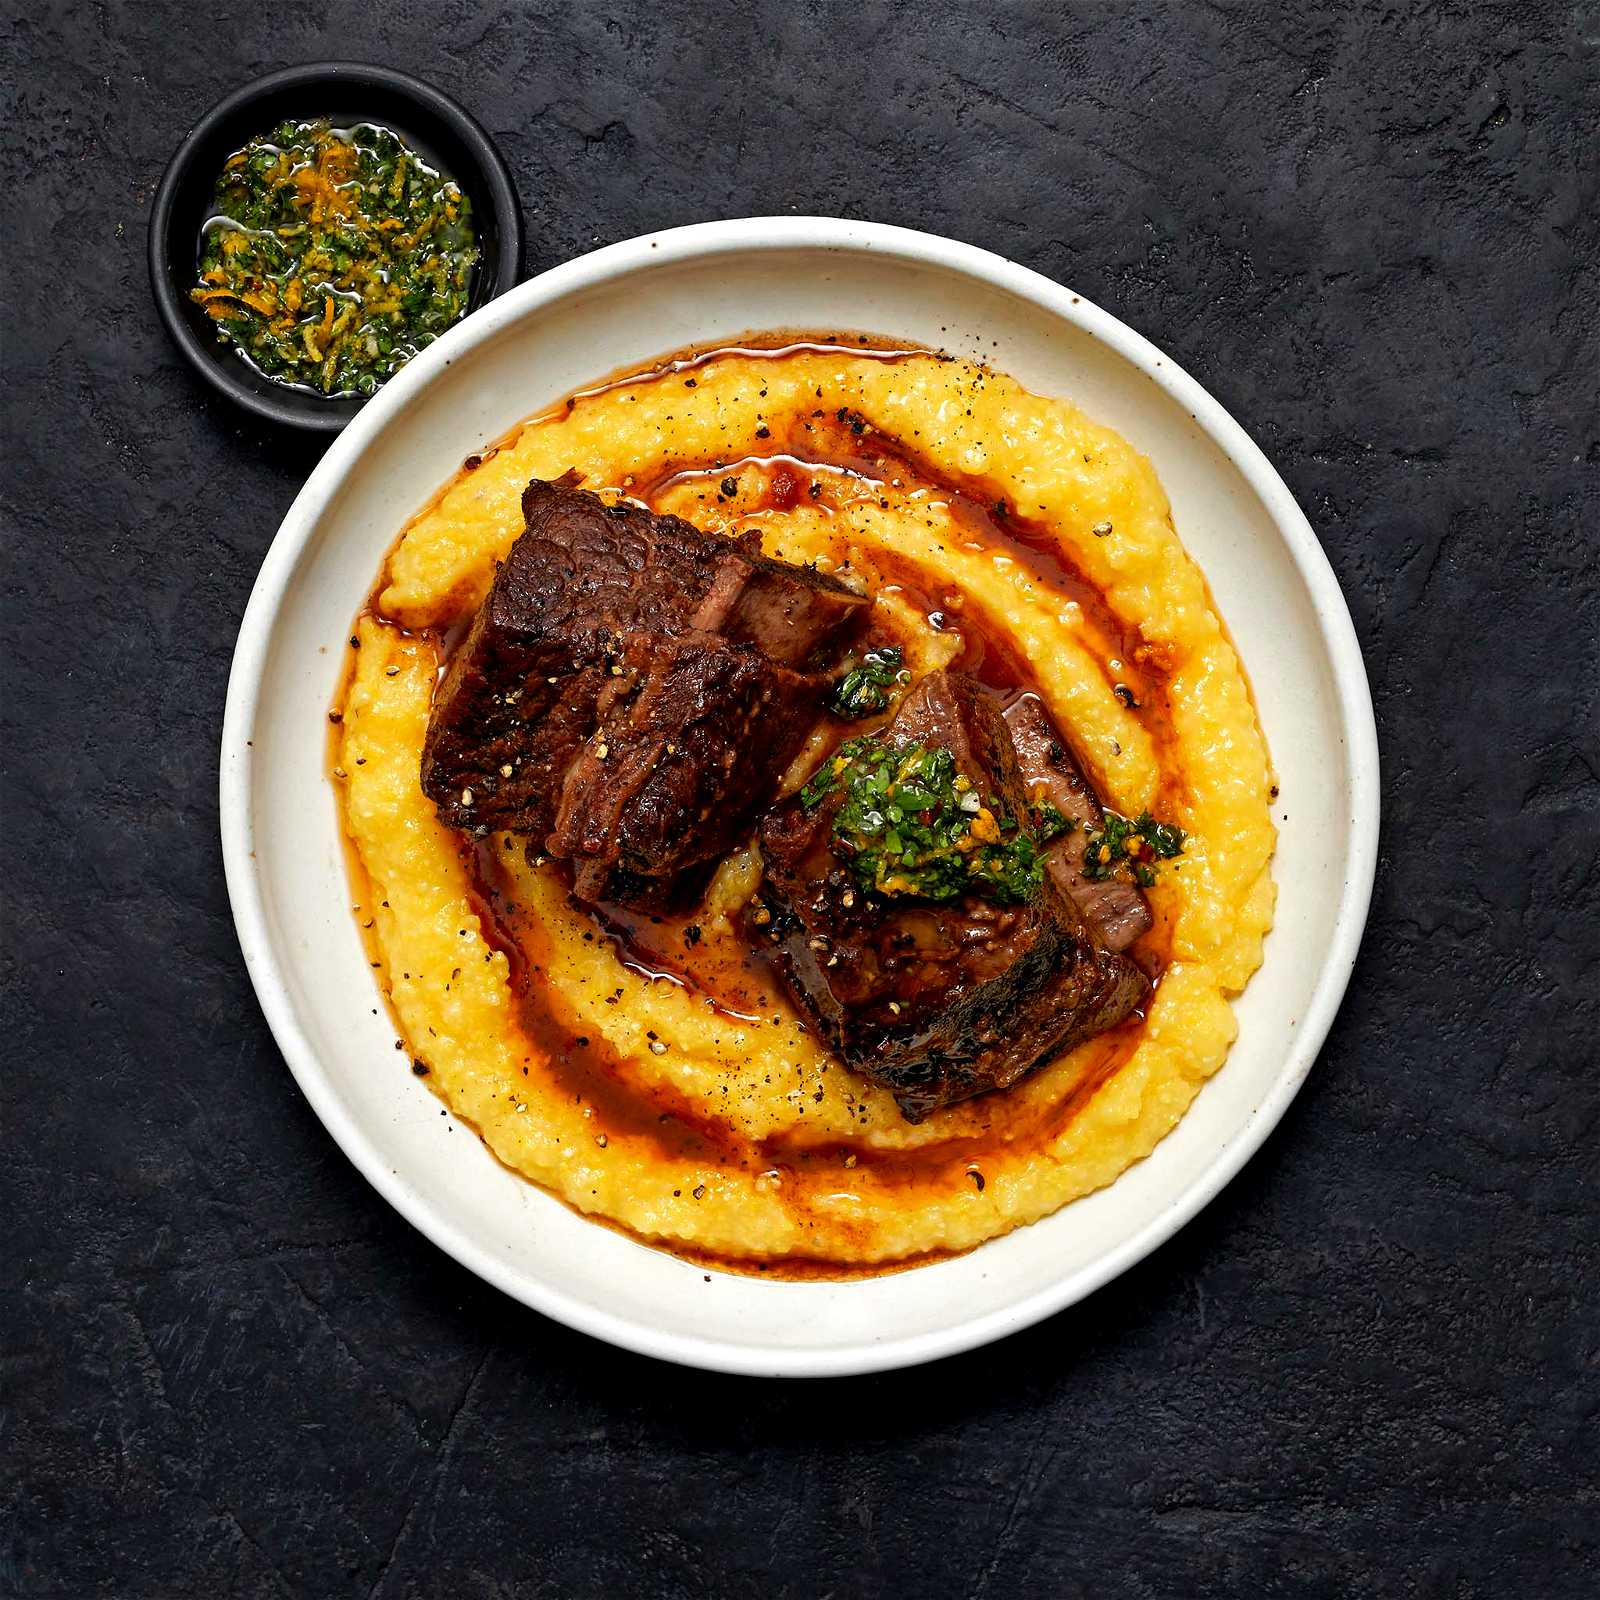 Image of Cabernet Braised Short Ribs with Gremolata